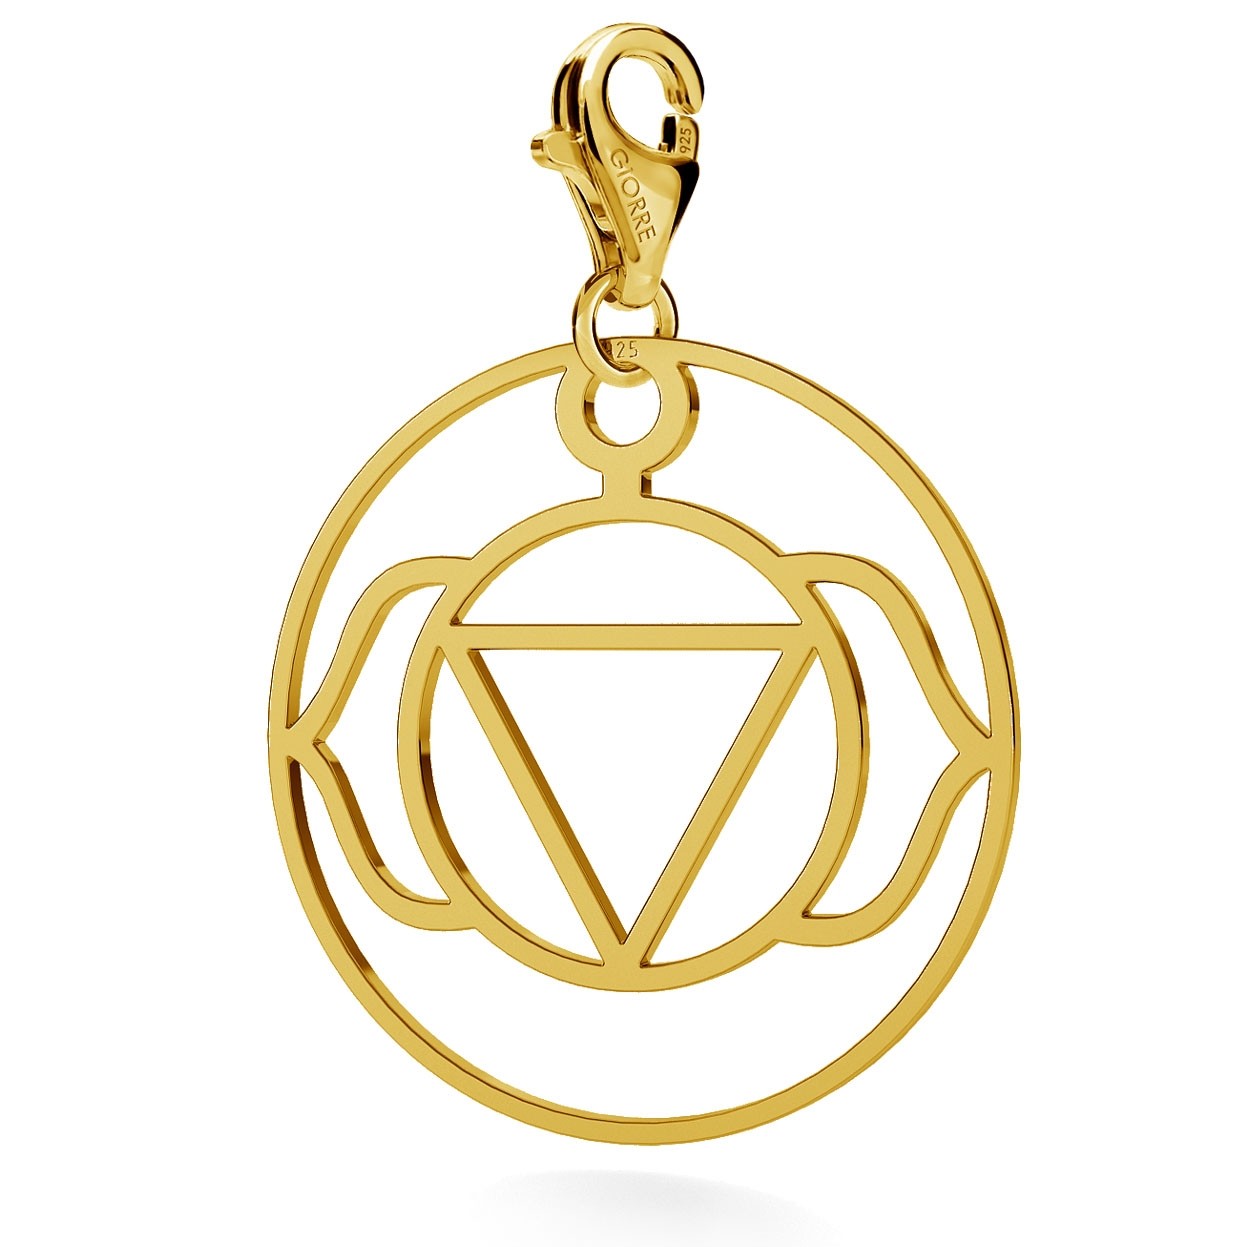 CHARM 69, THIRD EYE CHAKRA, STERLING SILVER (925) RHODIUM OR GOLD PLATED